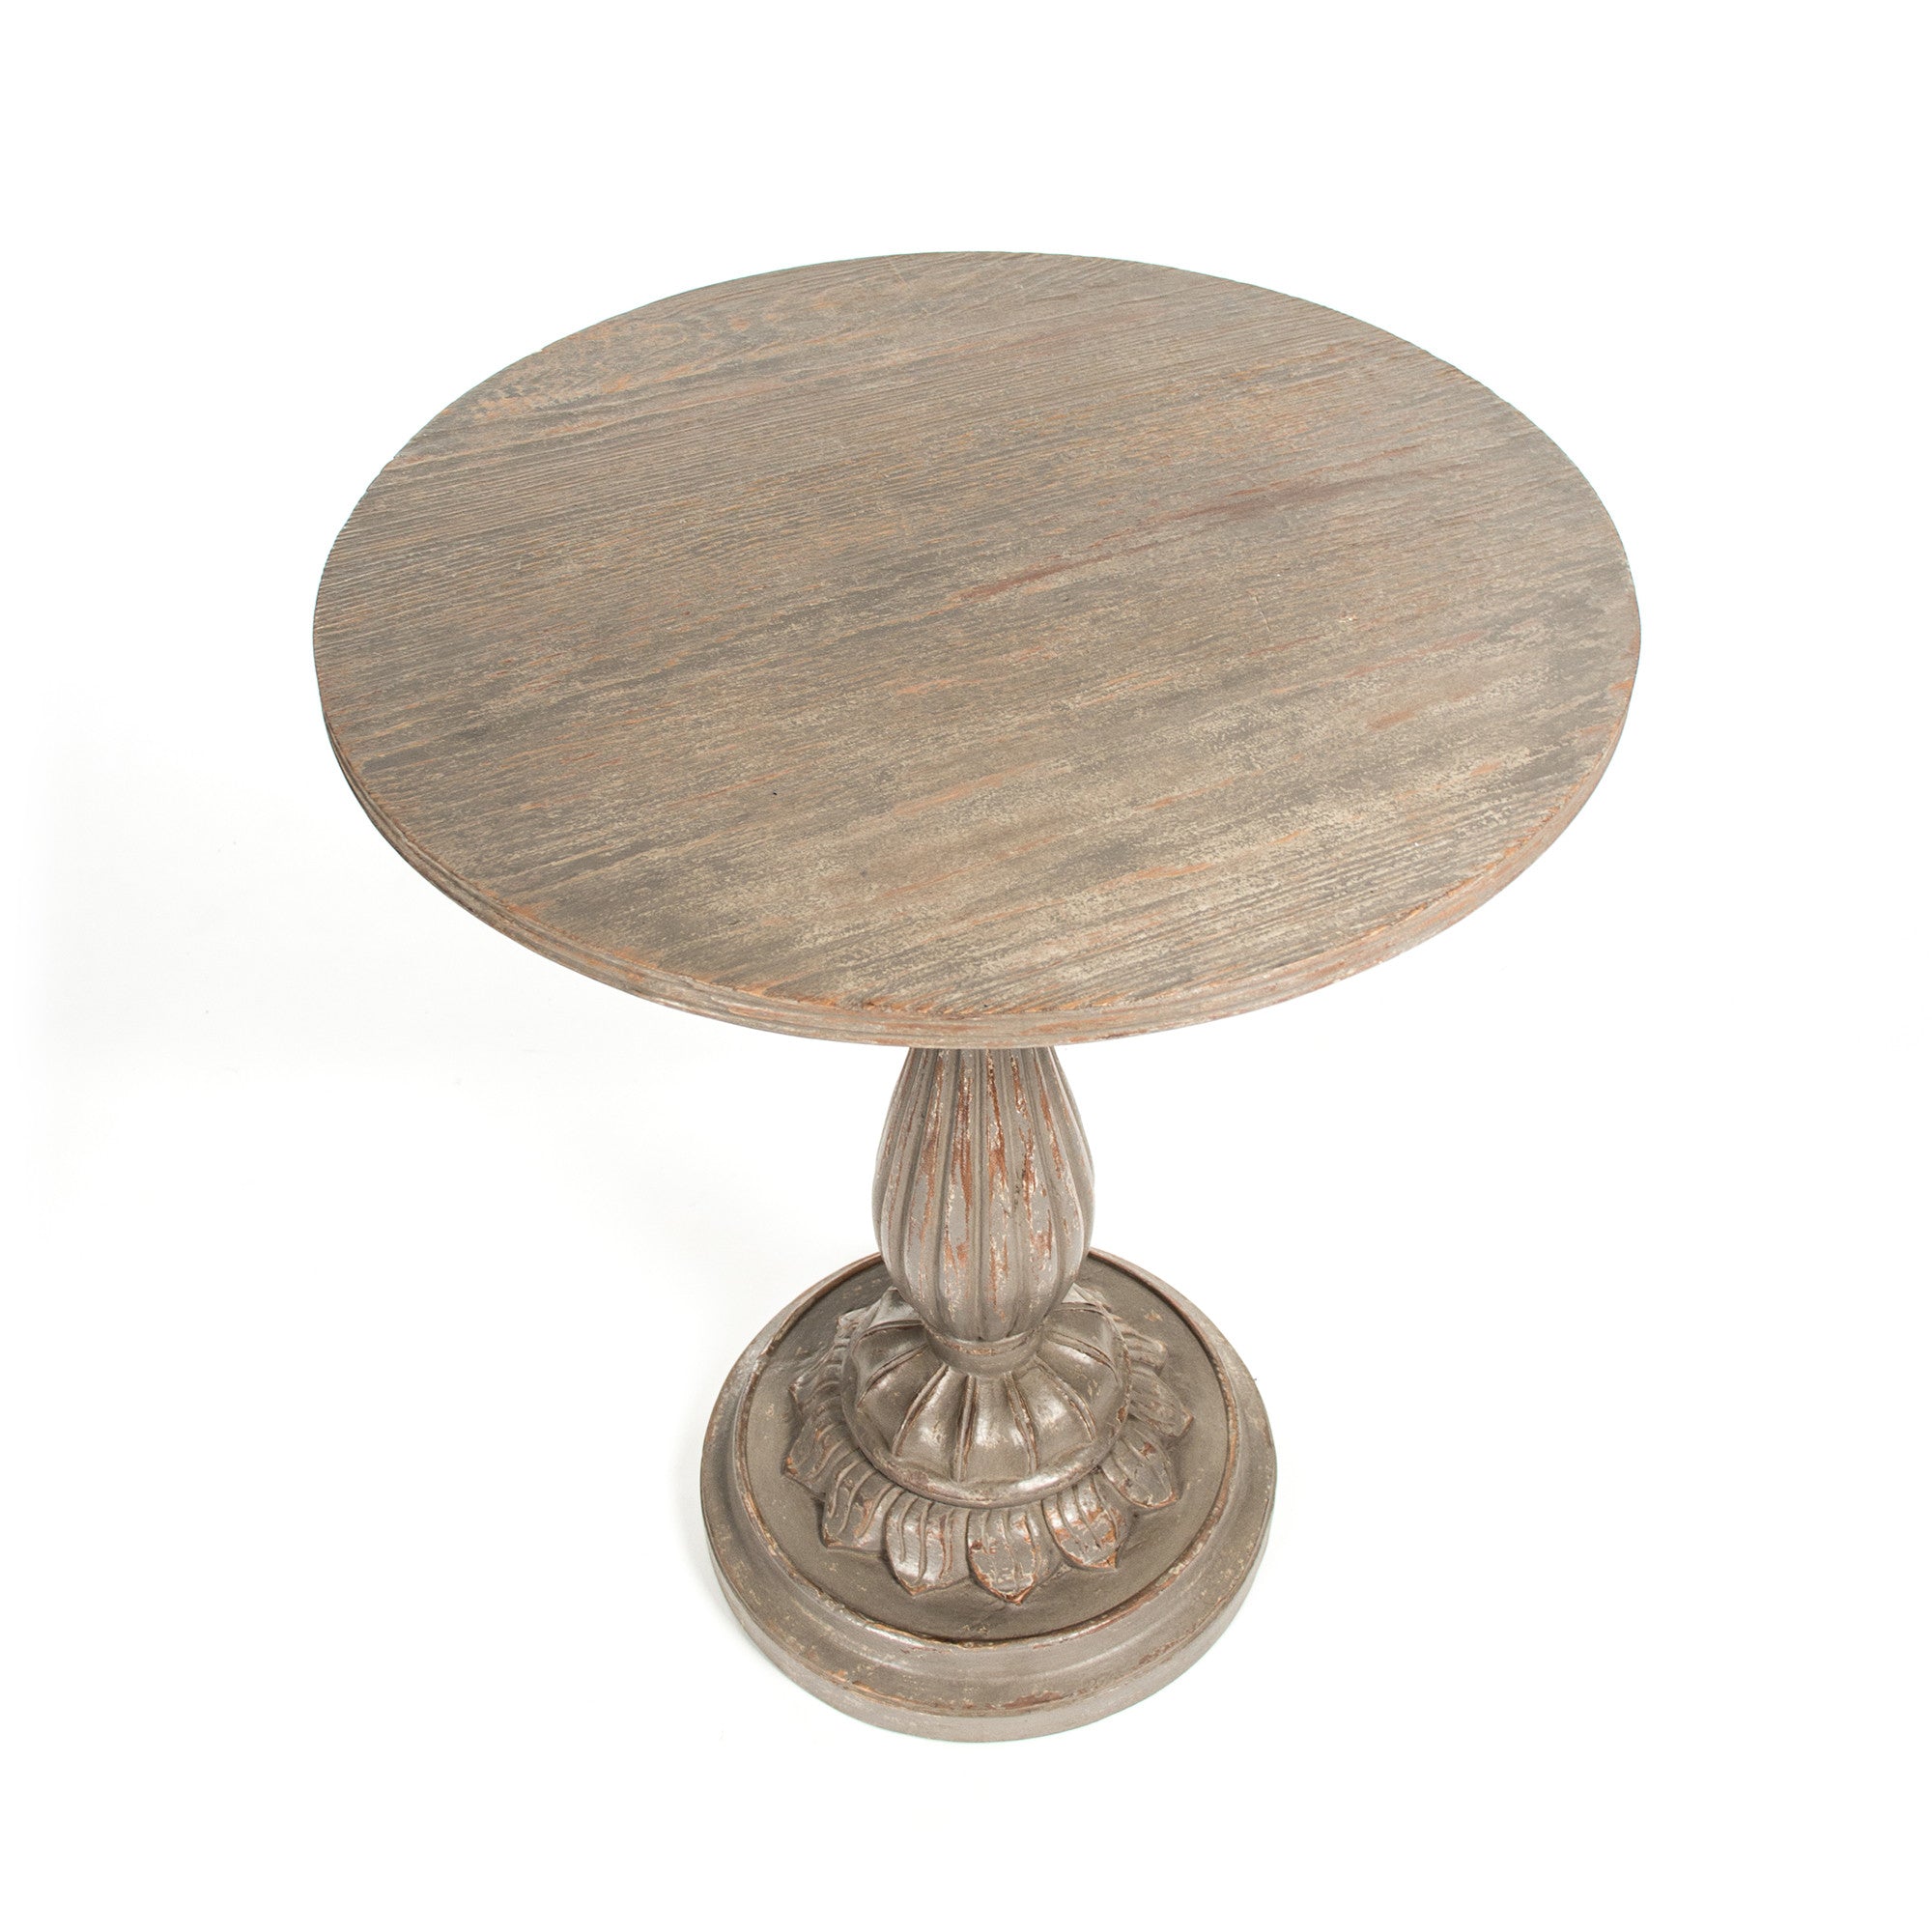 Accent Table - Esme End Table